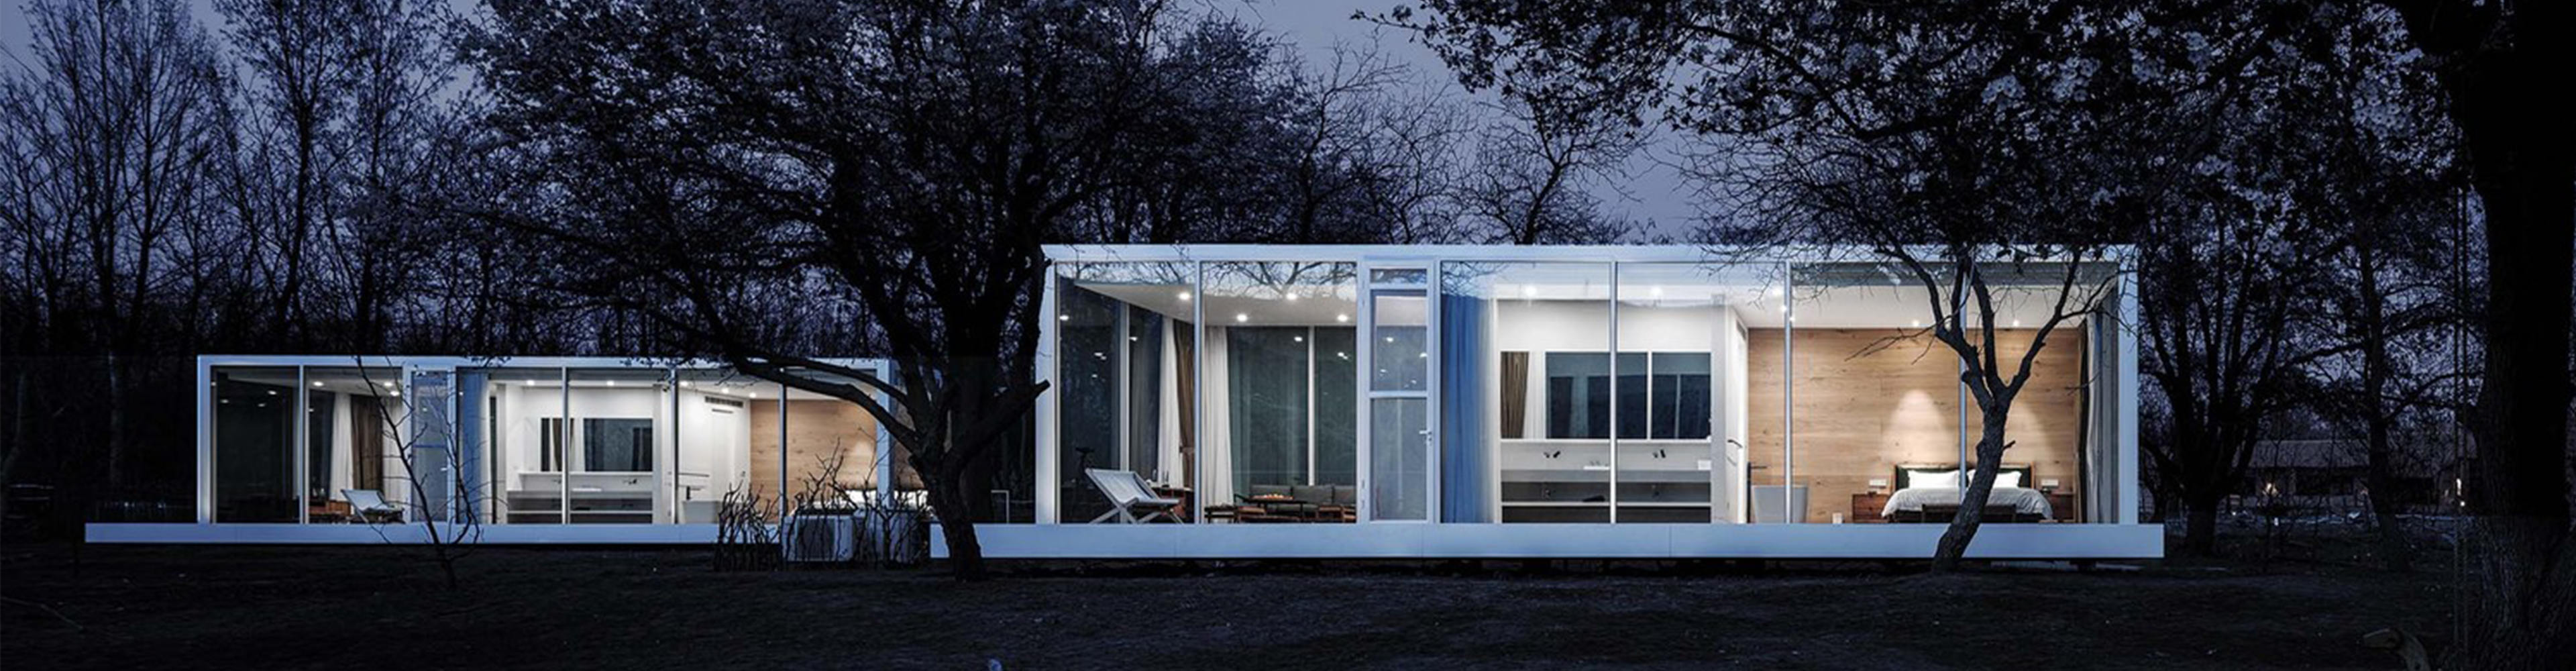 Fantasy Container House